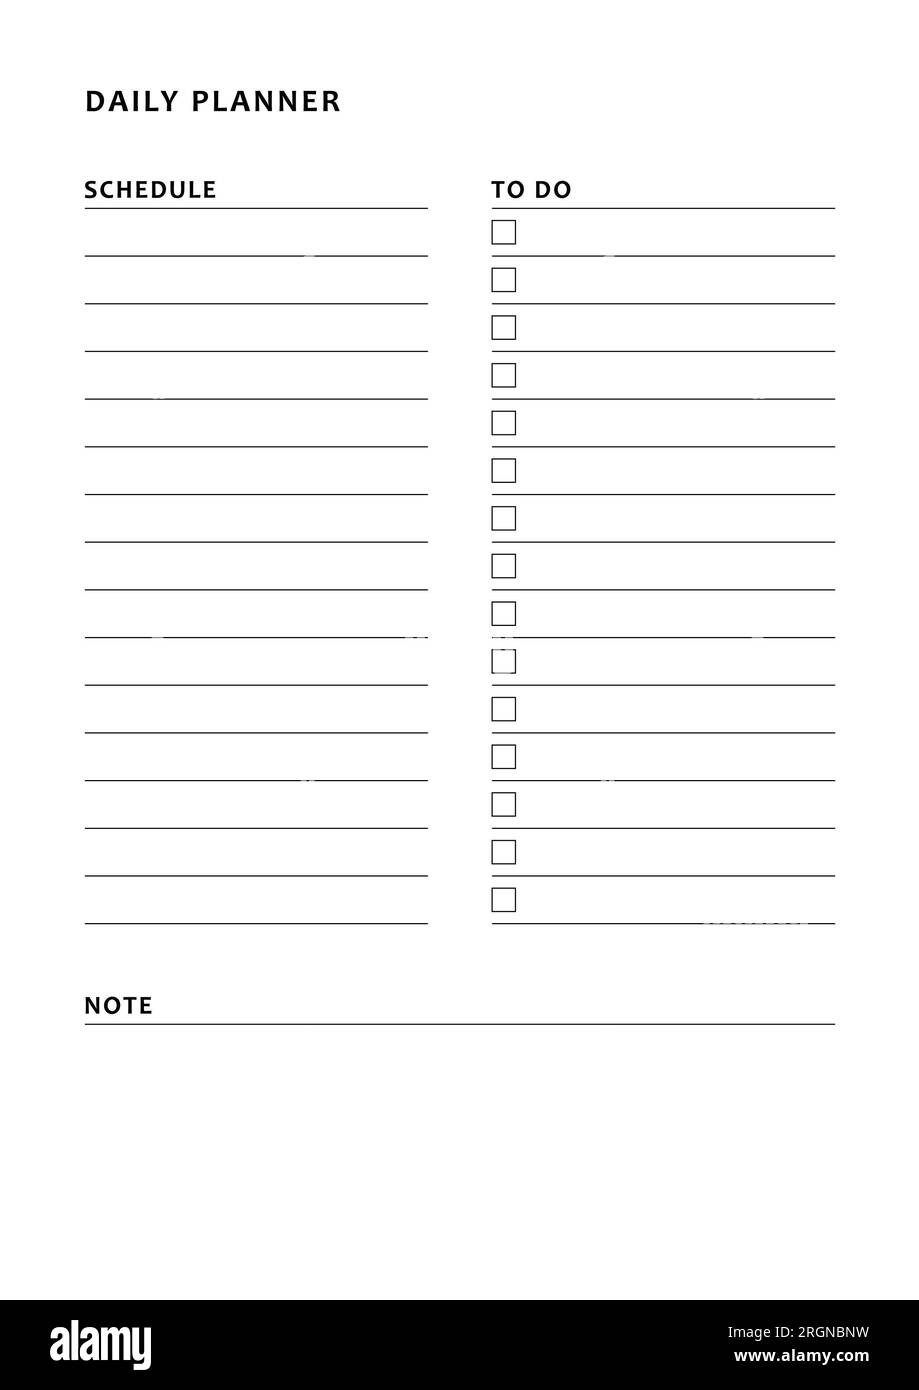 Daily Planner template ready for print. Page include Schedule and To Do lists, also including Note section. Can be used for planner and diary. Stock Photo